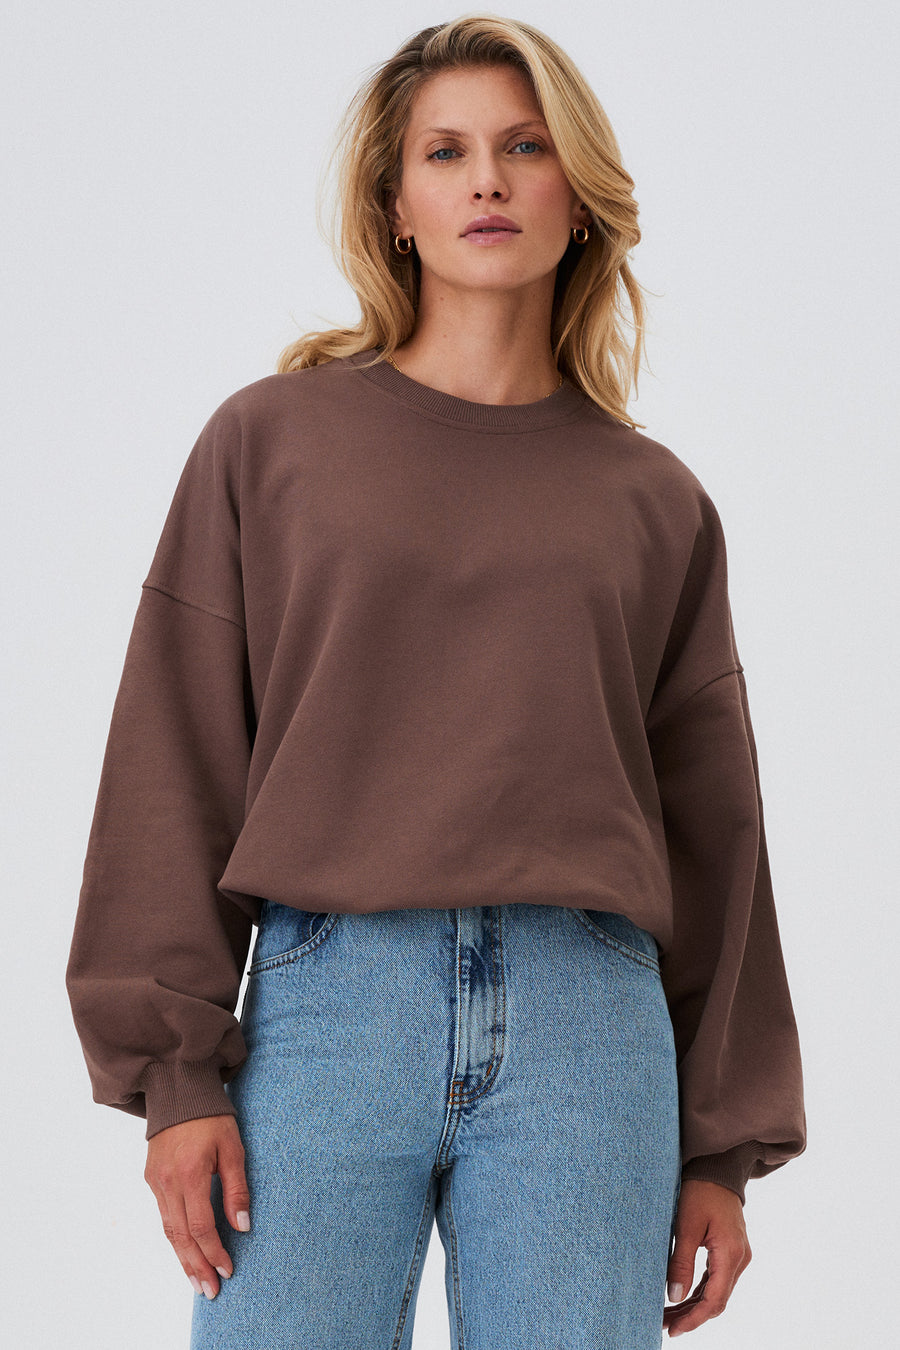 Sweatshirt in organic cotton / 17 / 12 / hazelnut *cropped-jeans-from-recycled-cotton-05-12-light-indigo* ?The model is 177cm tall and wears size XS/S? |